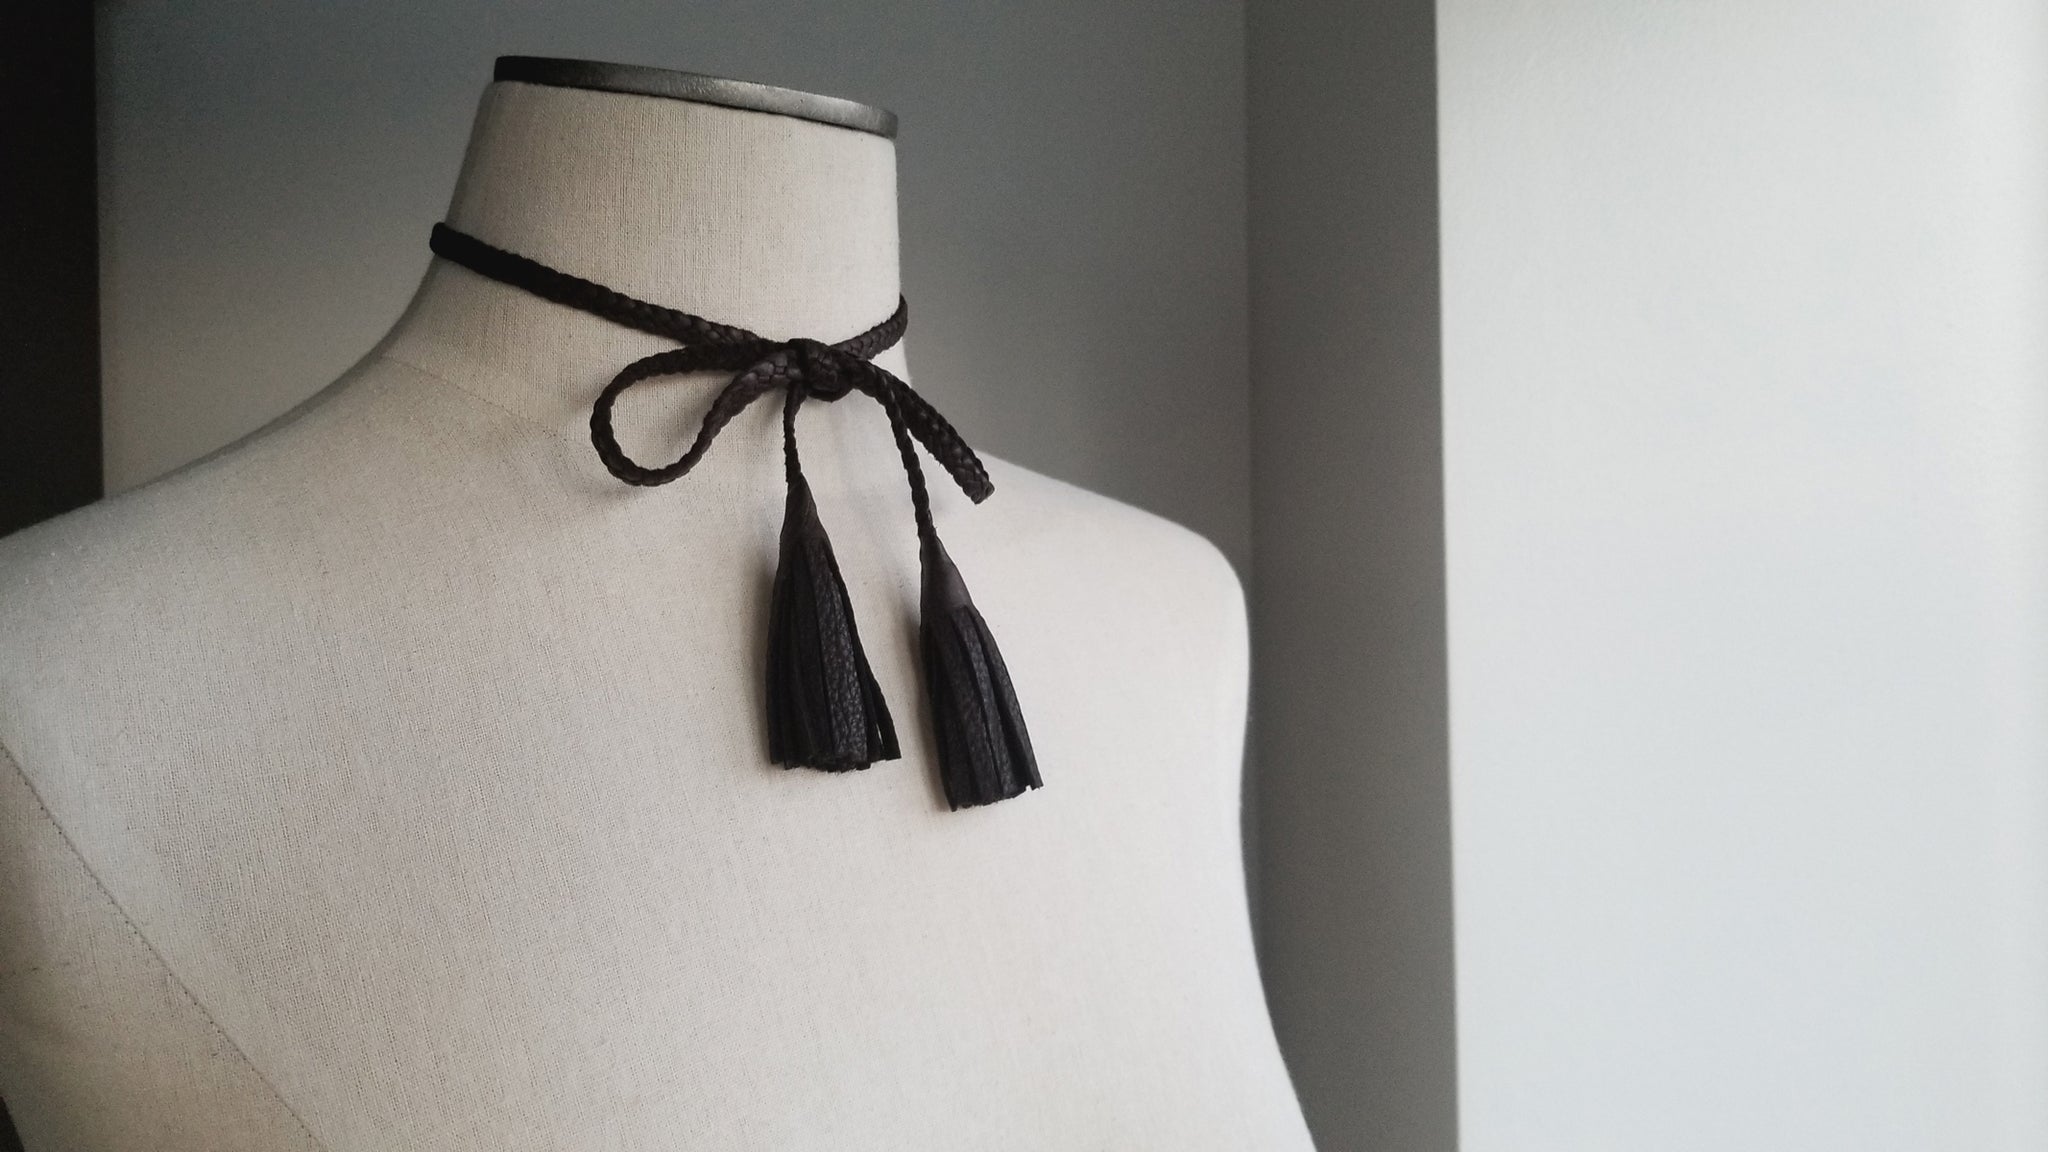 Dua Braided Leather Tassel Necklace, bow and tassels, in chocolate brown deerskin leather